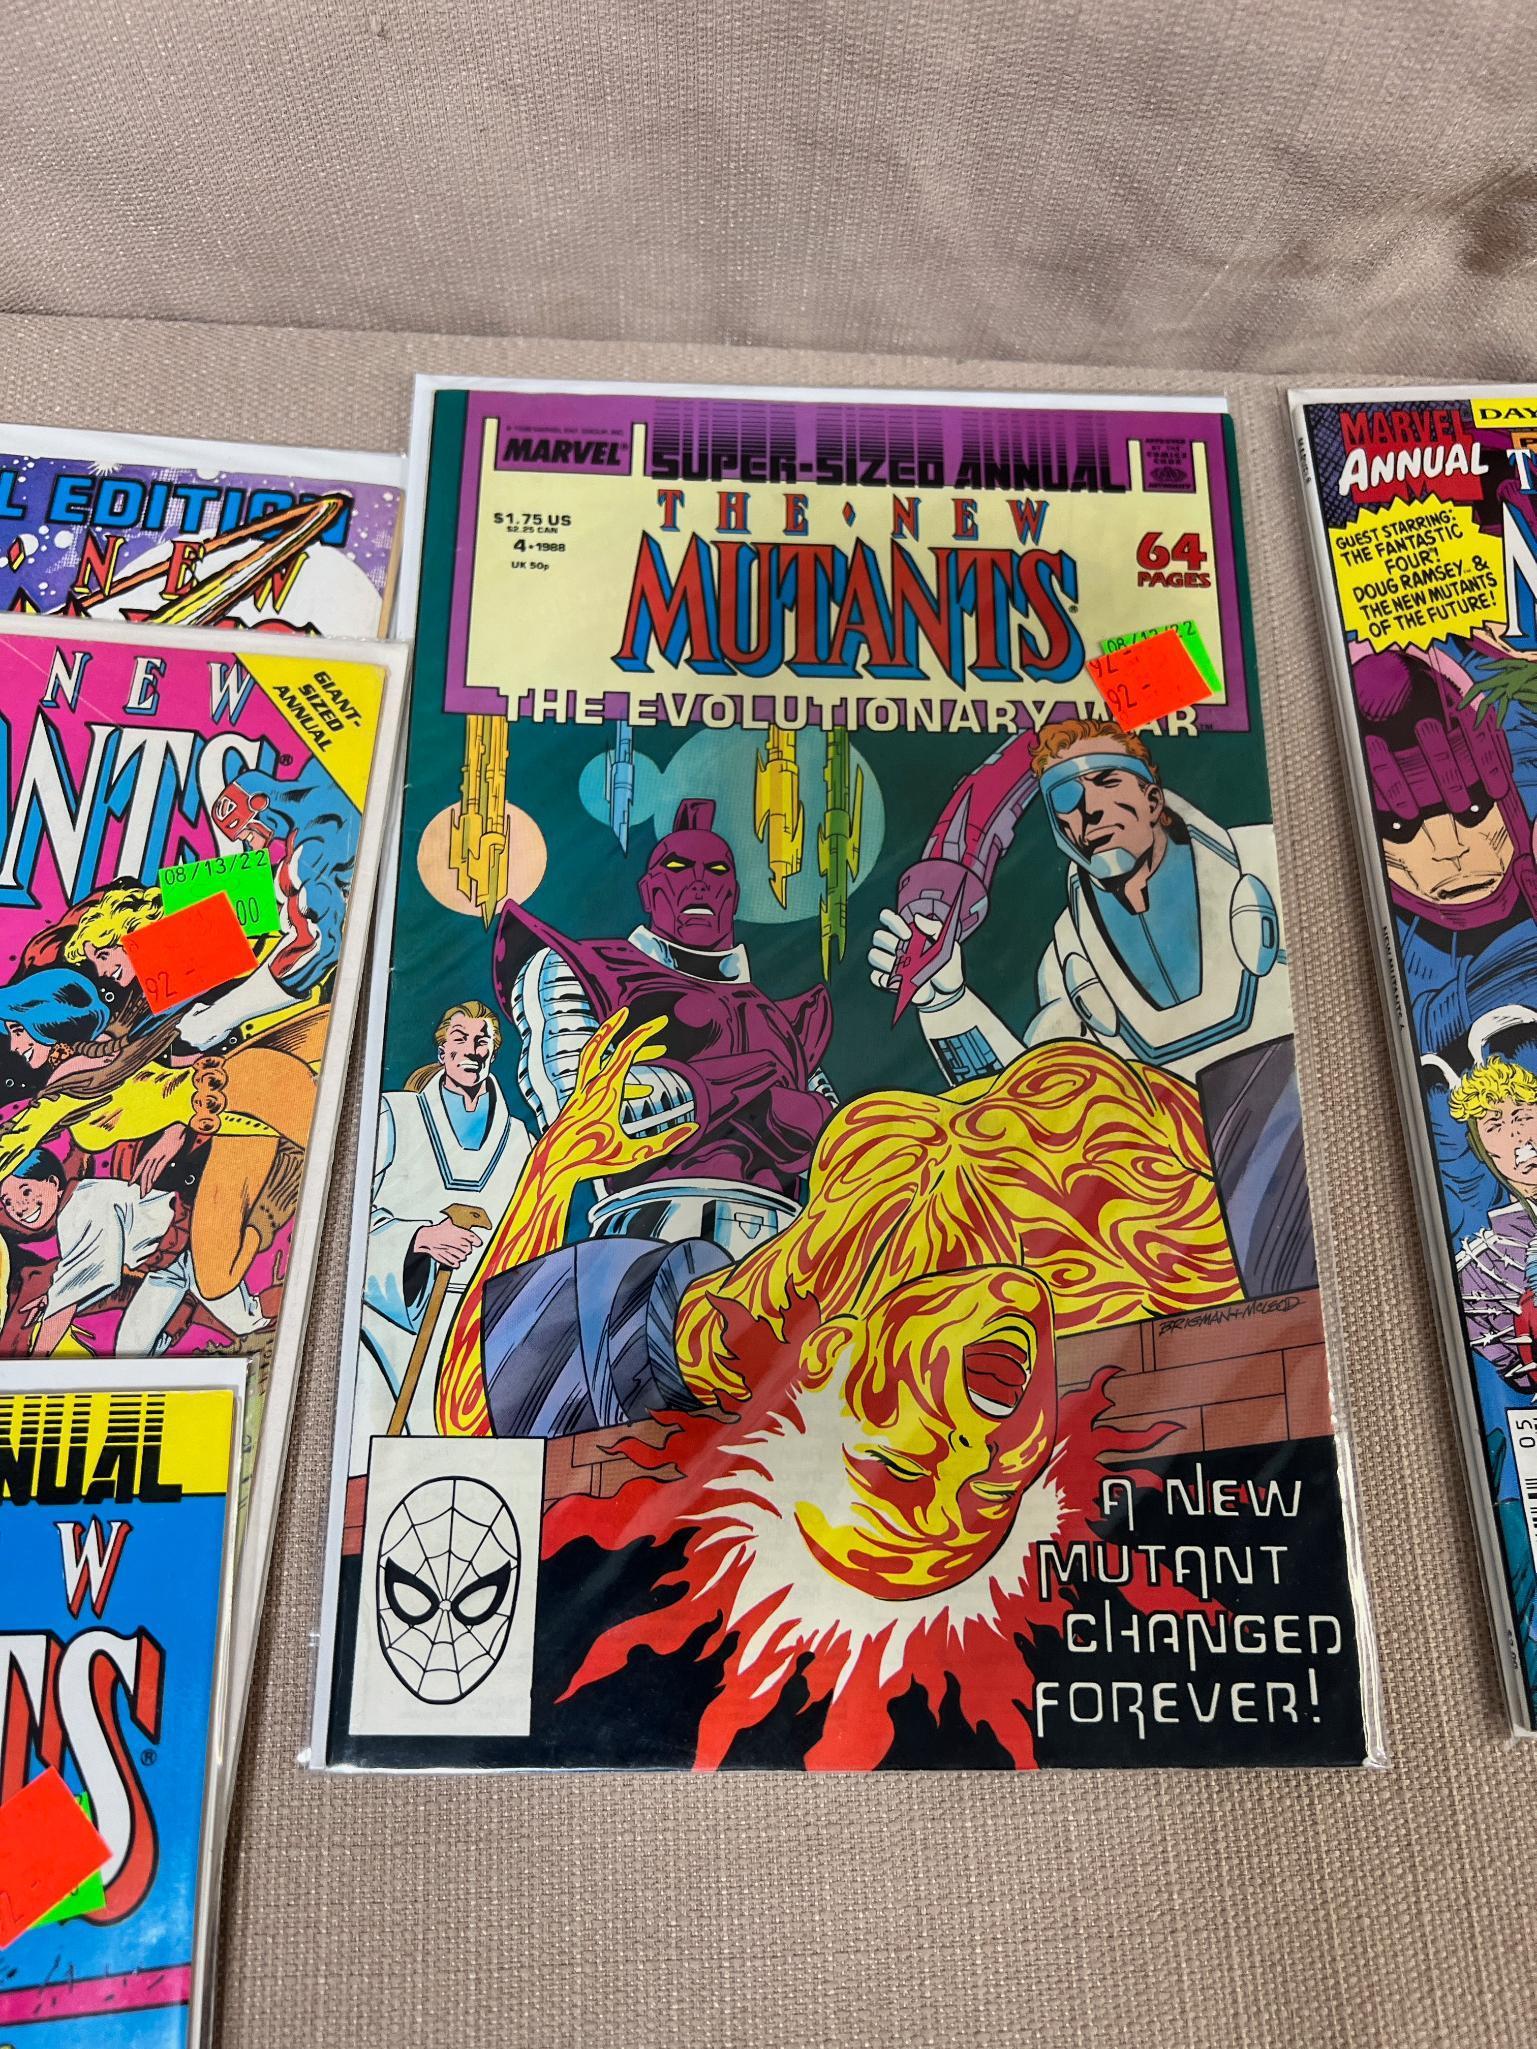 9- The New Mutants Various Annual Editions